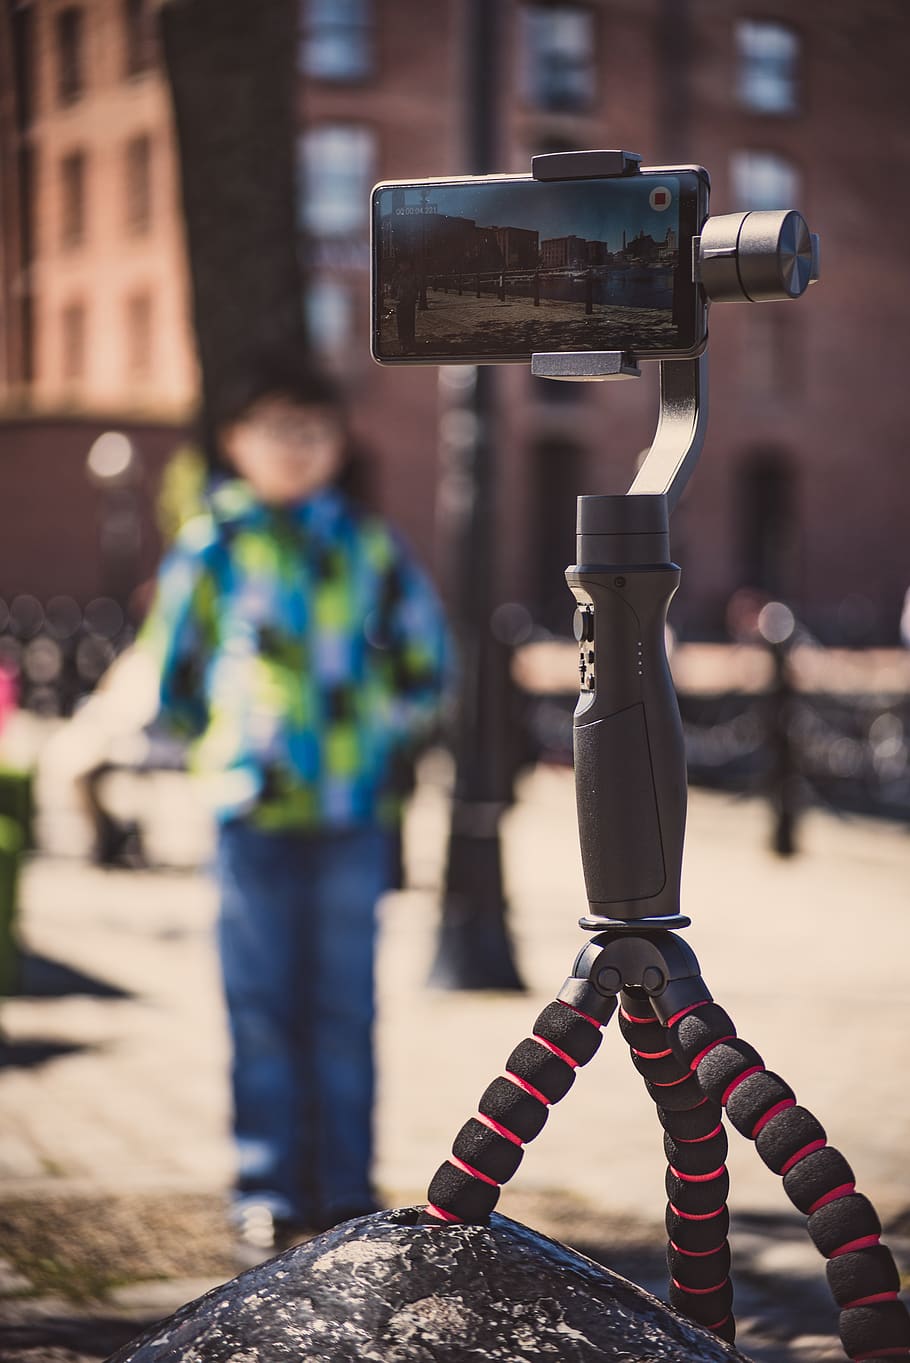 gimbal, taking pictures, making videos, mobile phone, gadget, liverpool, smartphone, phone, mobile, technology